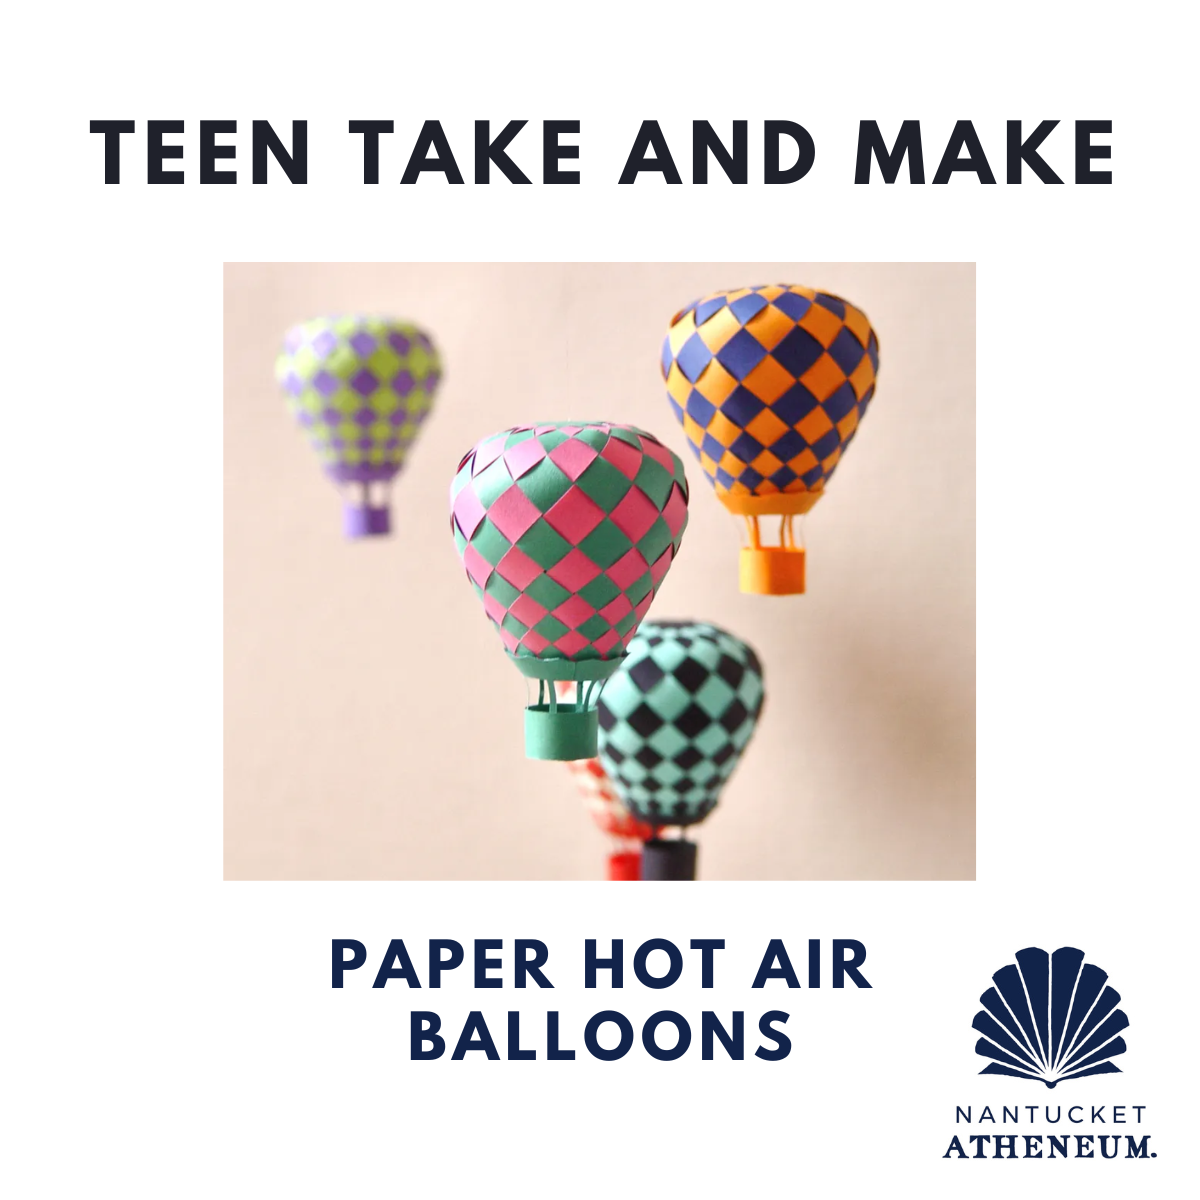 Paper hot air balloons in a variety of colors